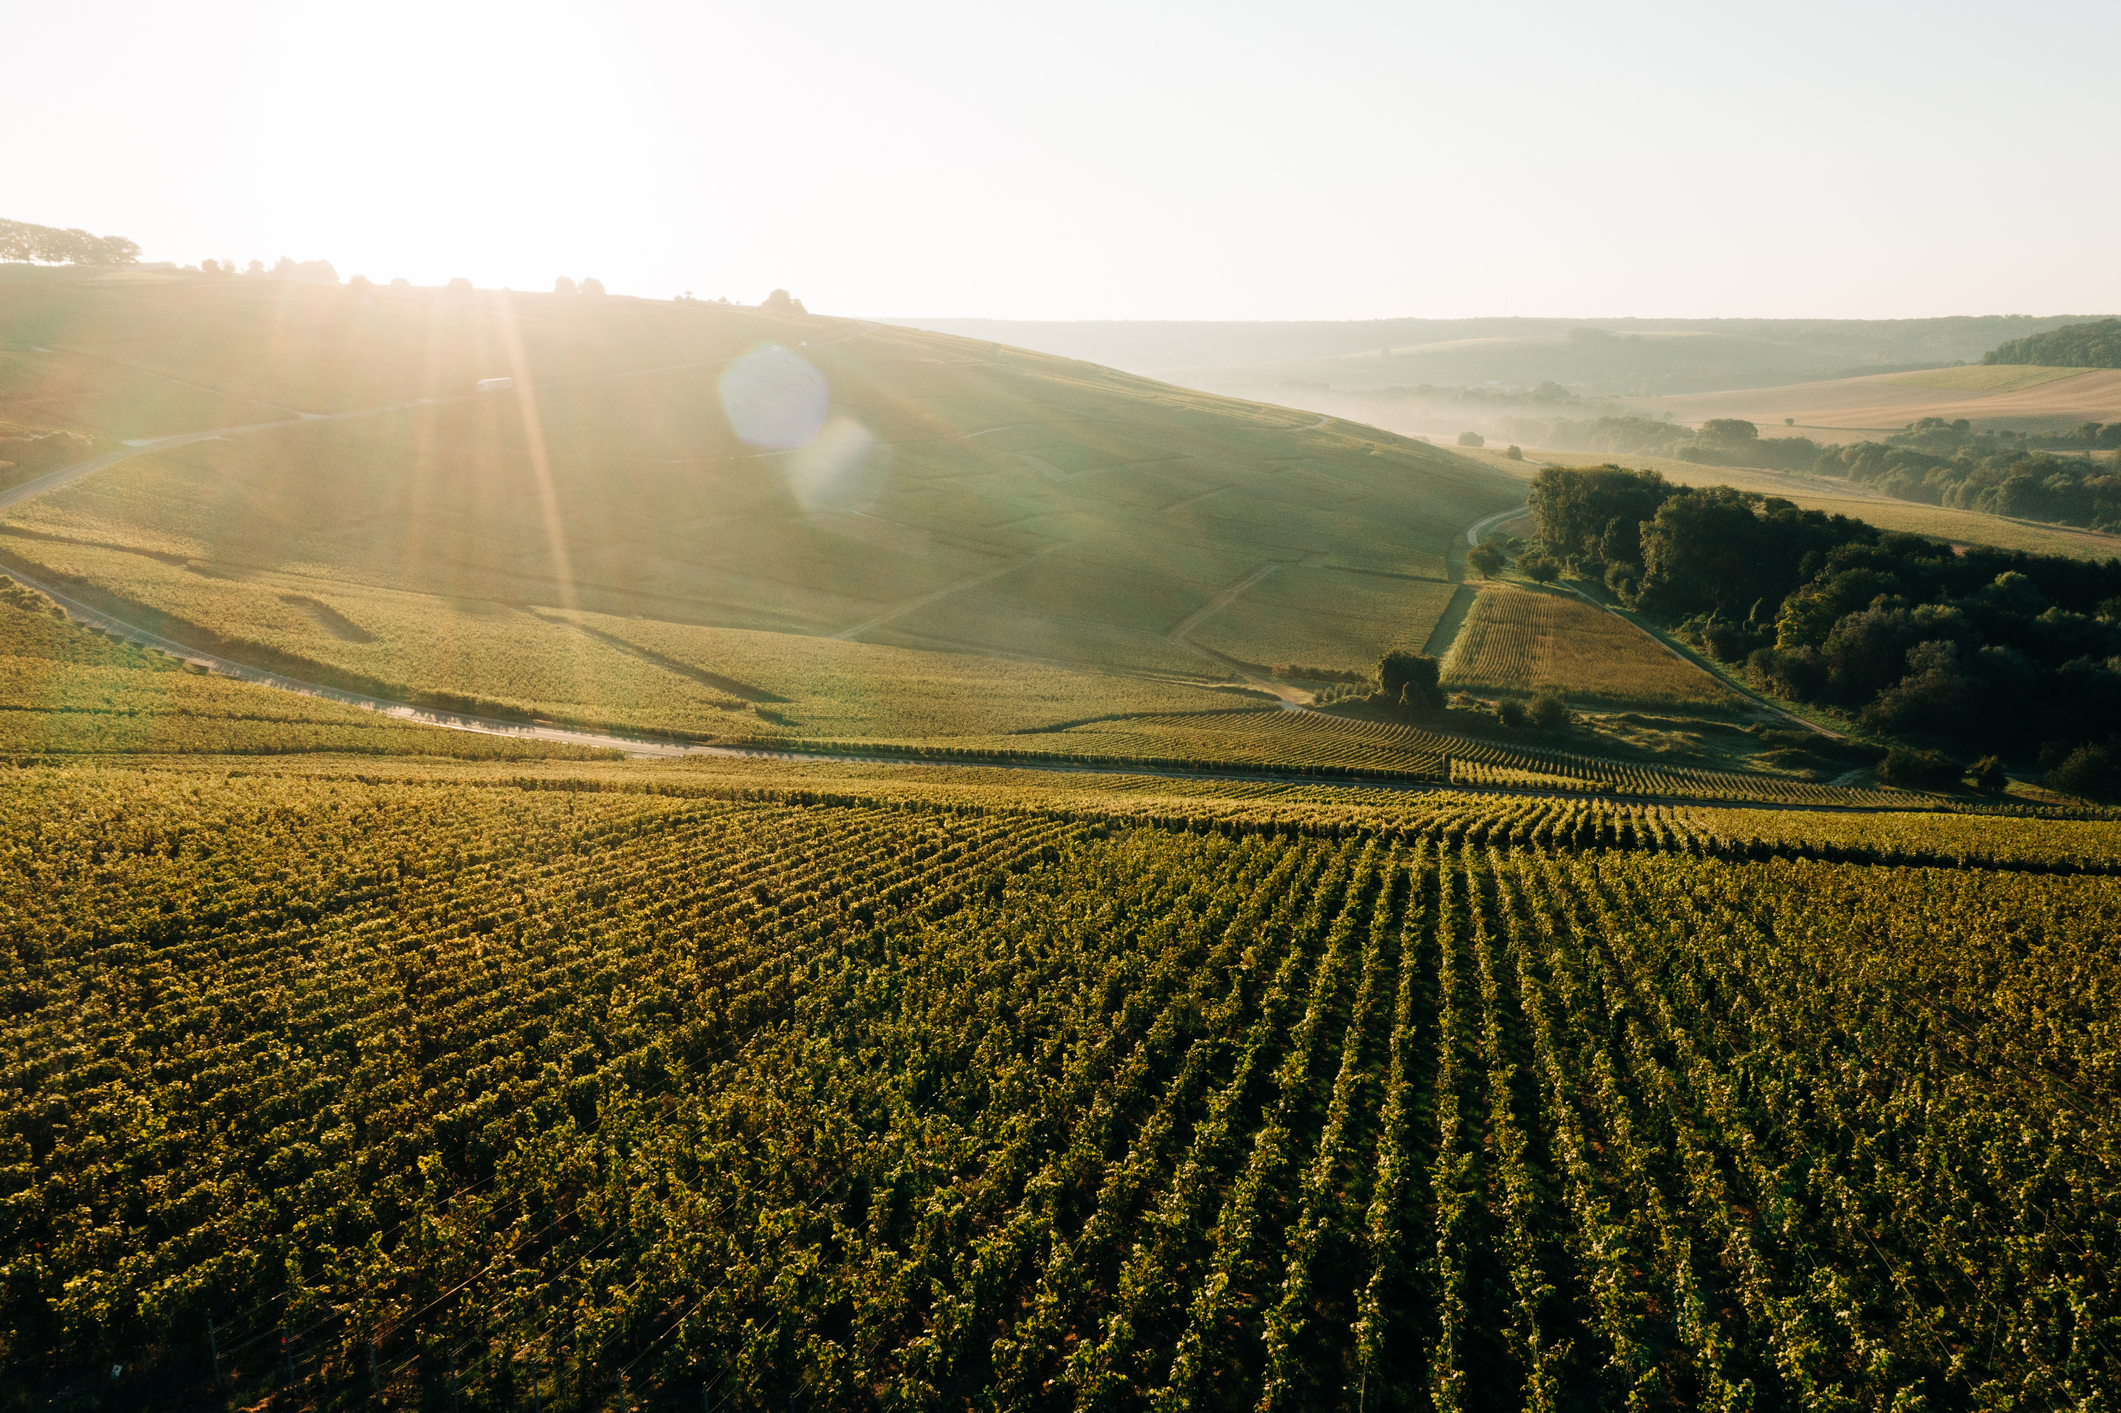 Vineyards in the Champagne region of France at sunrise - stock photo